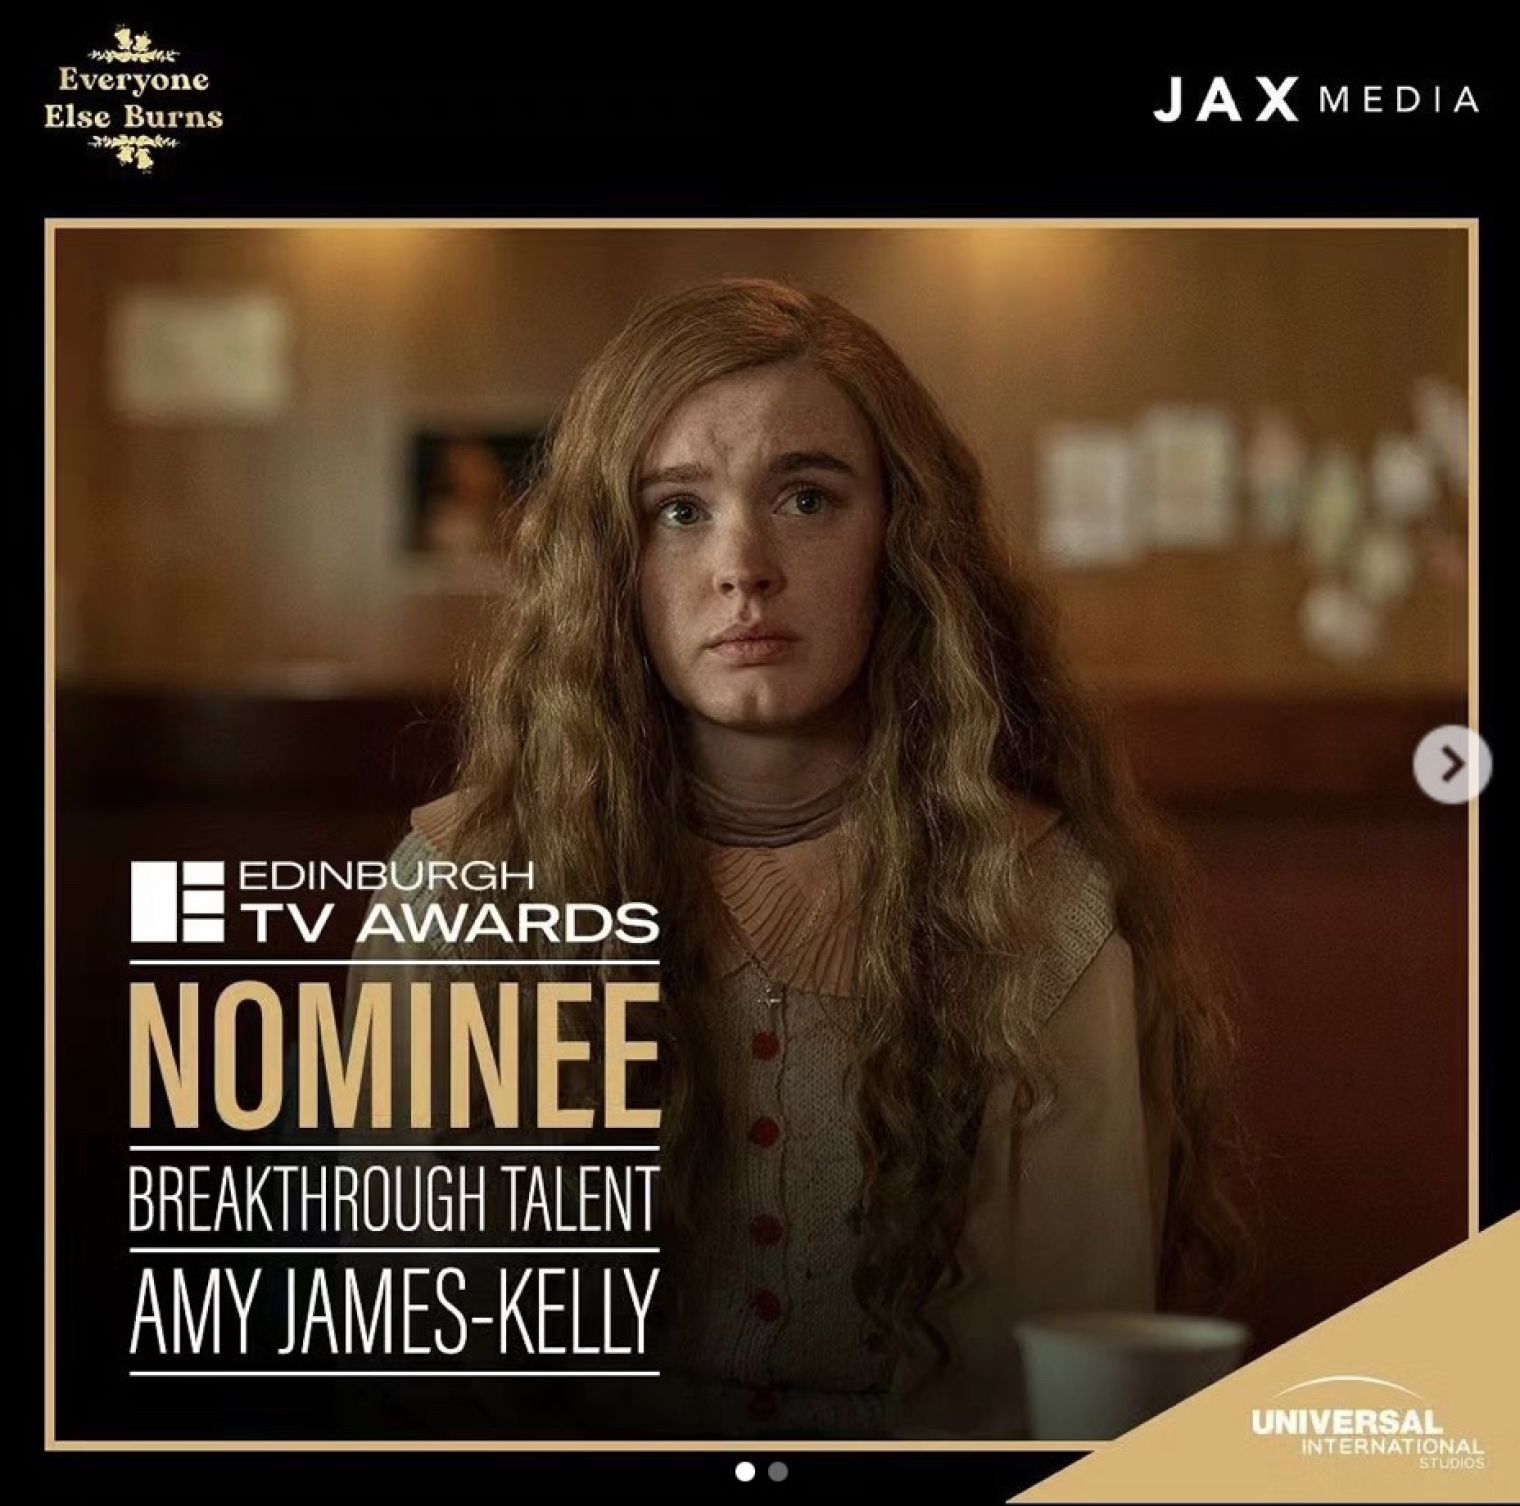 Amy James-Kelly has been nominated for Breakthrough Talent in this year’s prestigious Edinburgh TV Awards